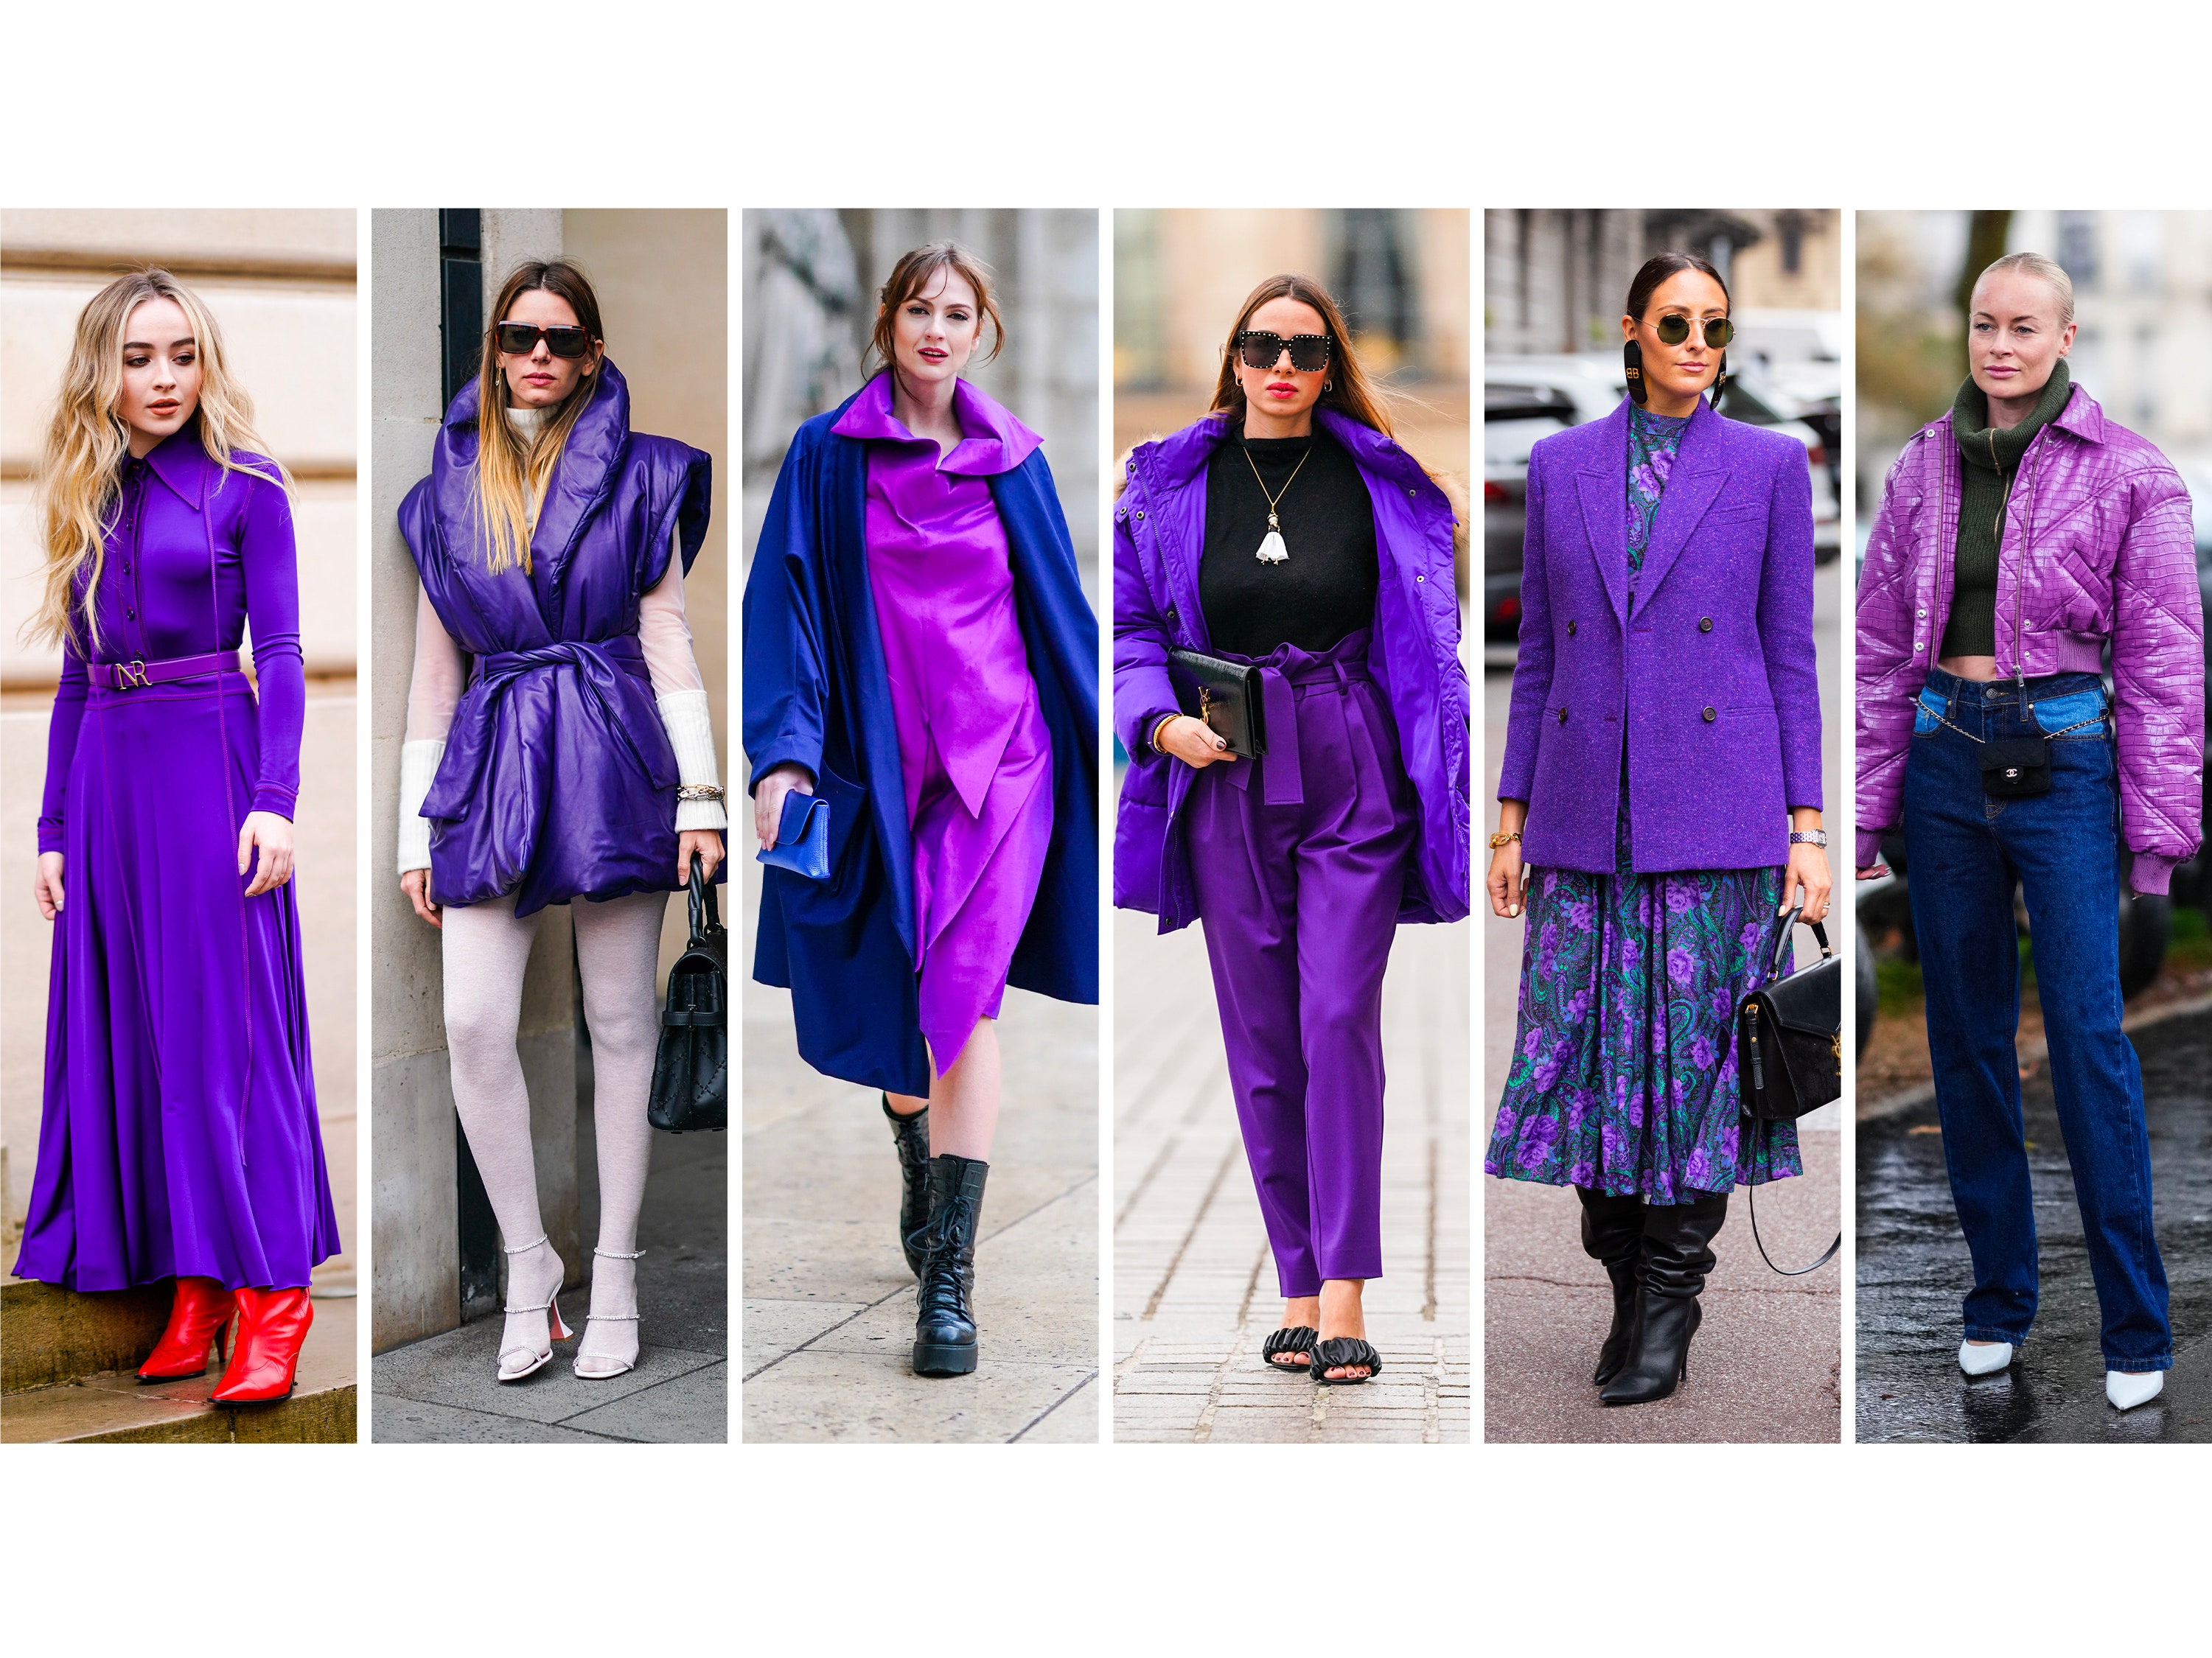 Catch the trend in 2022 with the very peri purple fashion mix